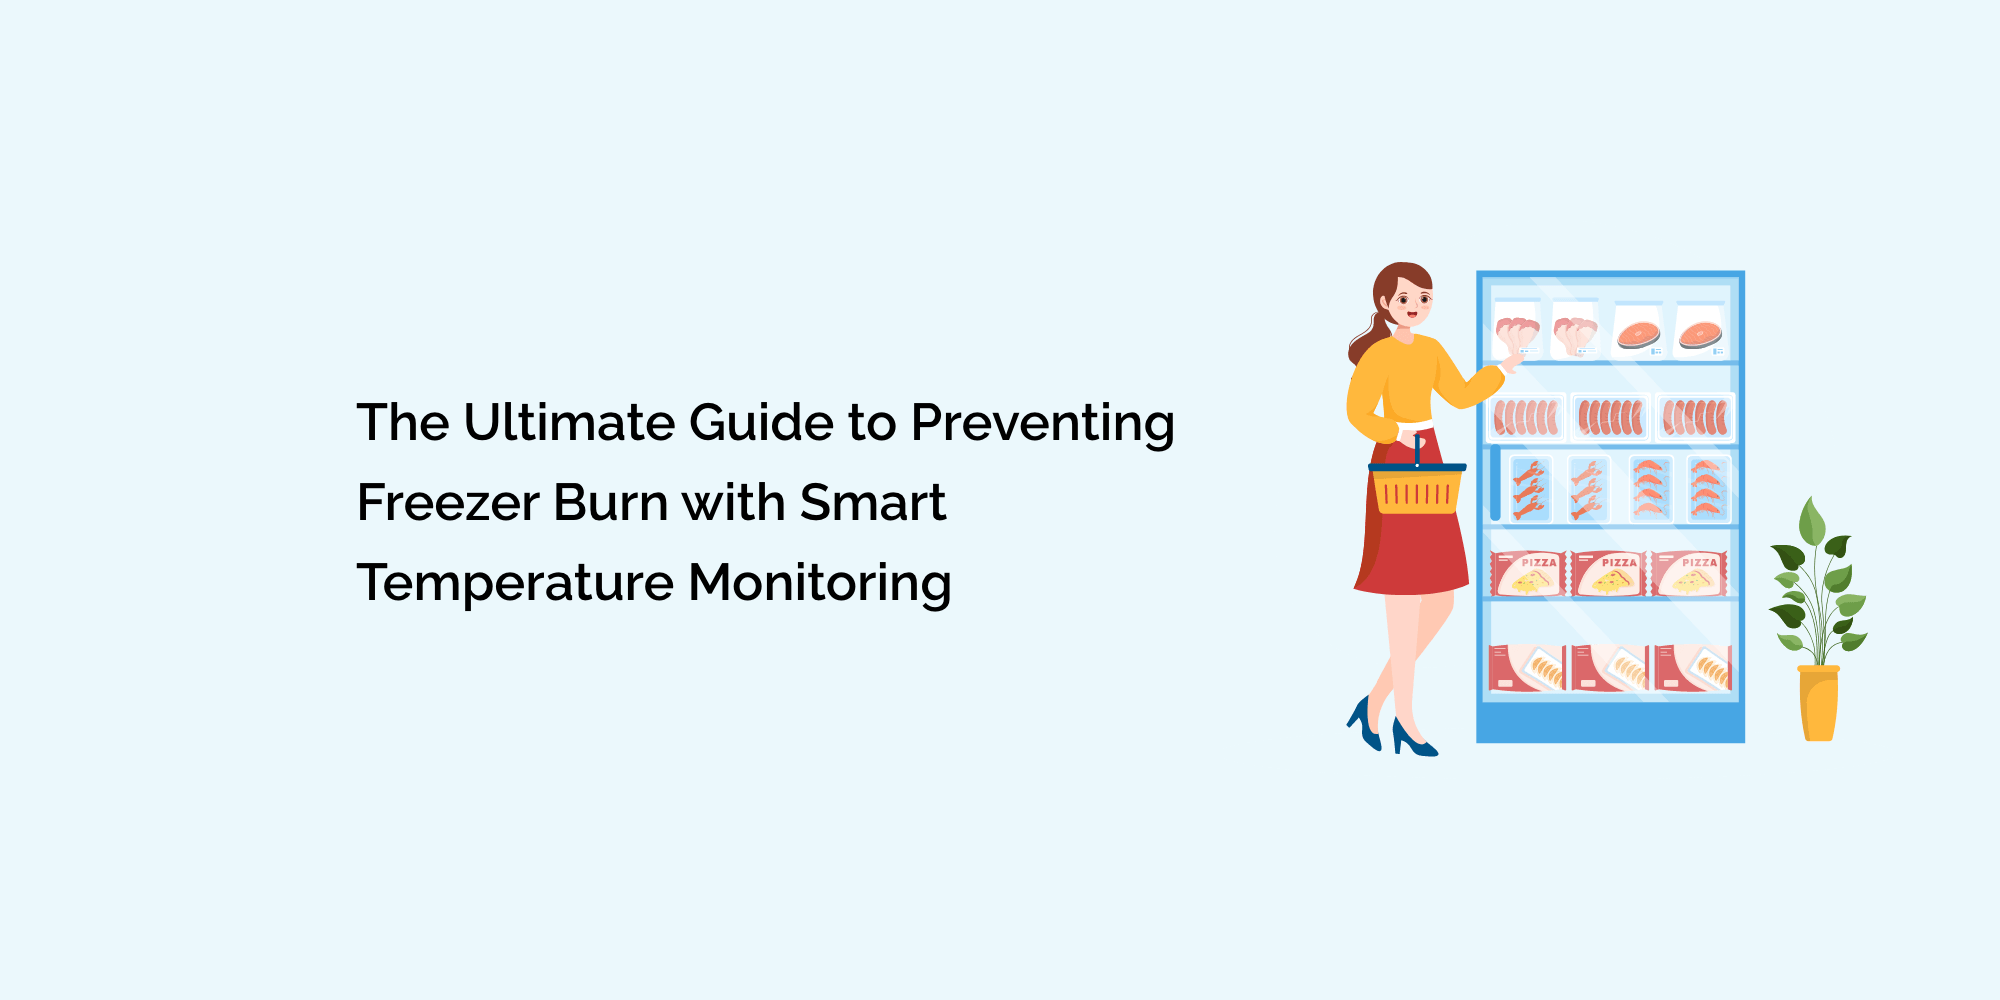 The Ultimate Guide to Preventing Freezer Burn with Smart Temperature Monitoring